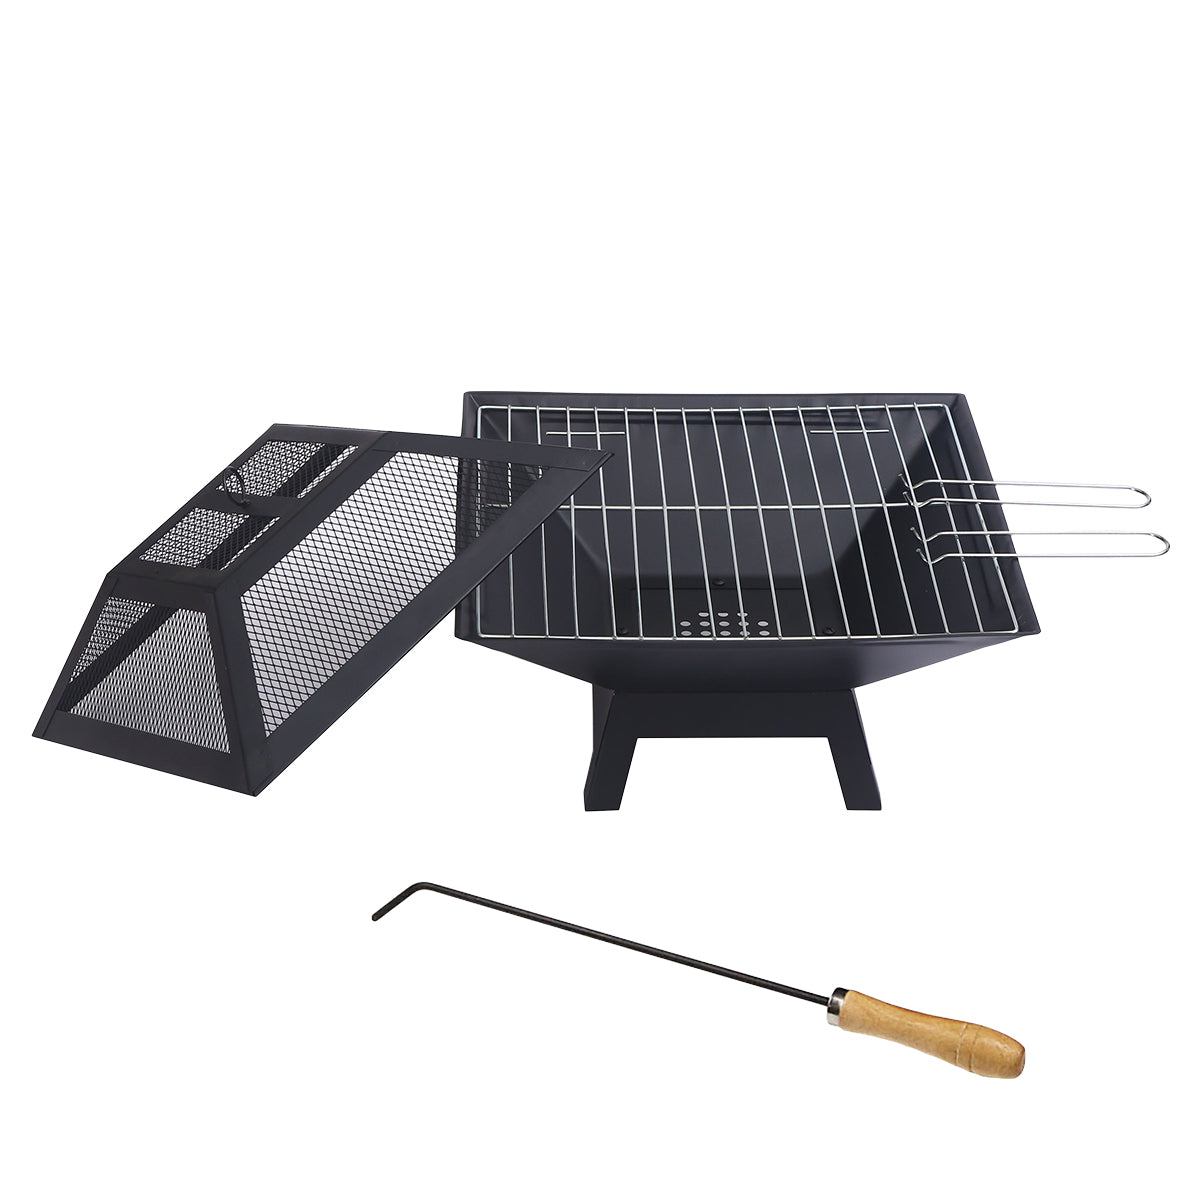 Wallaroo Portable Outdoor Fire Pit for BBQ, Grilling, Cooking, Camping